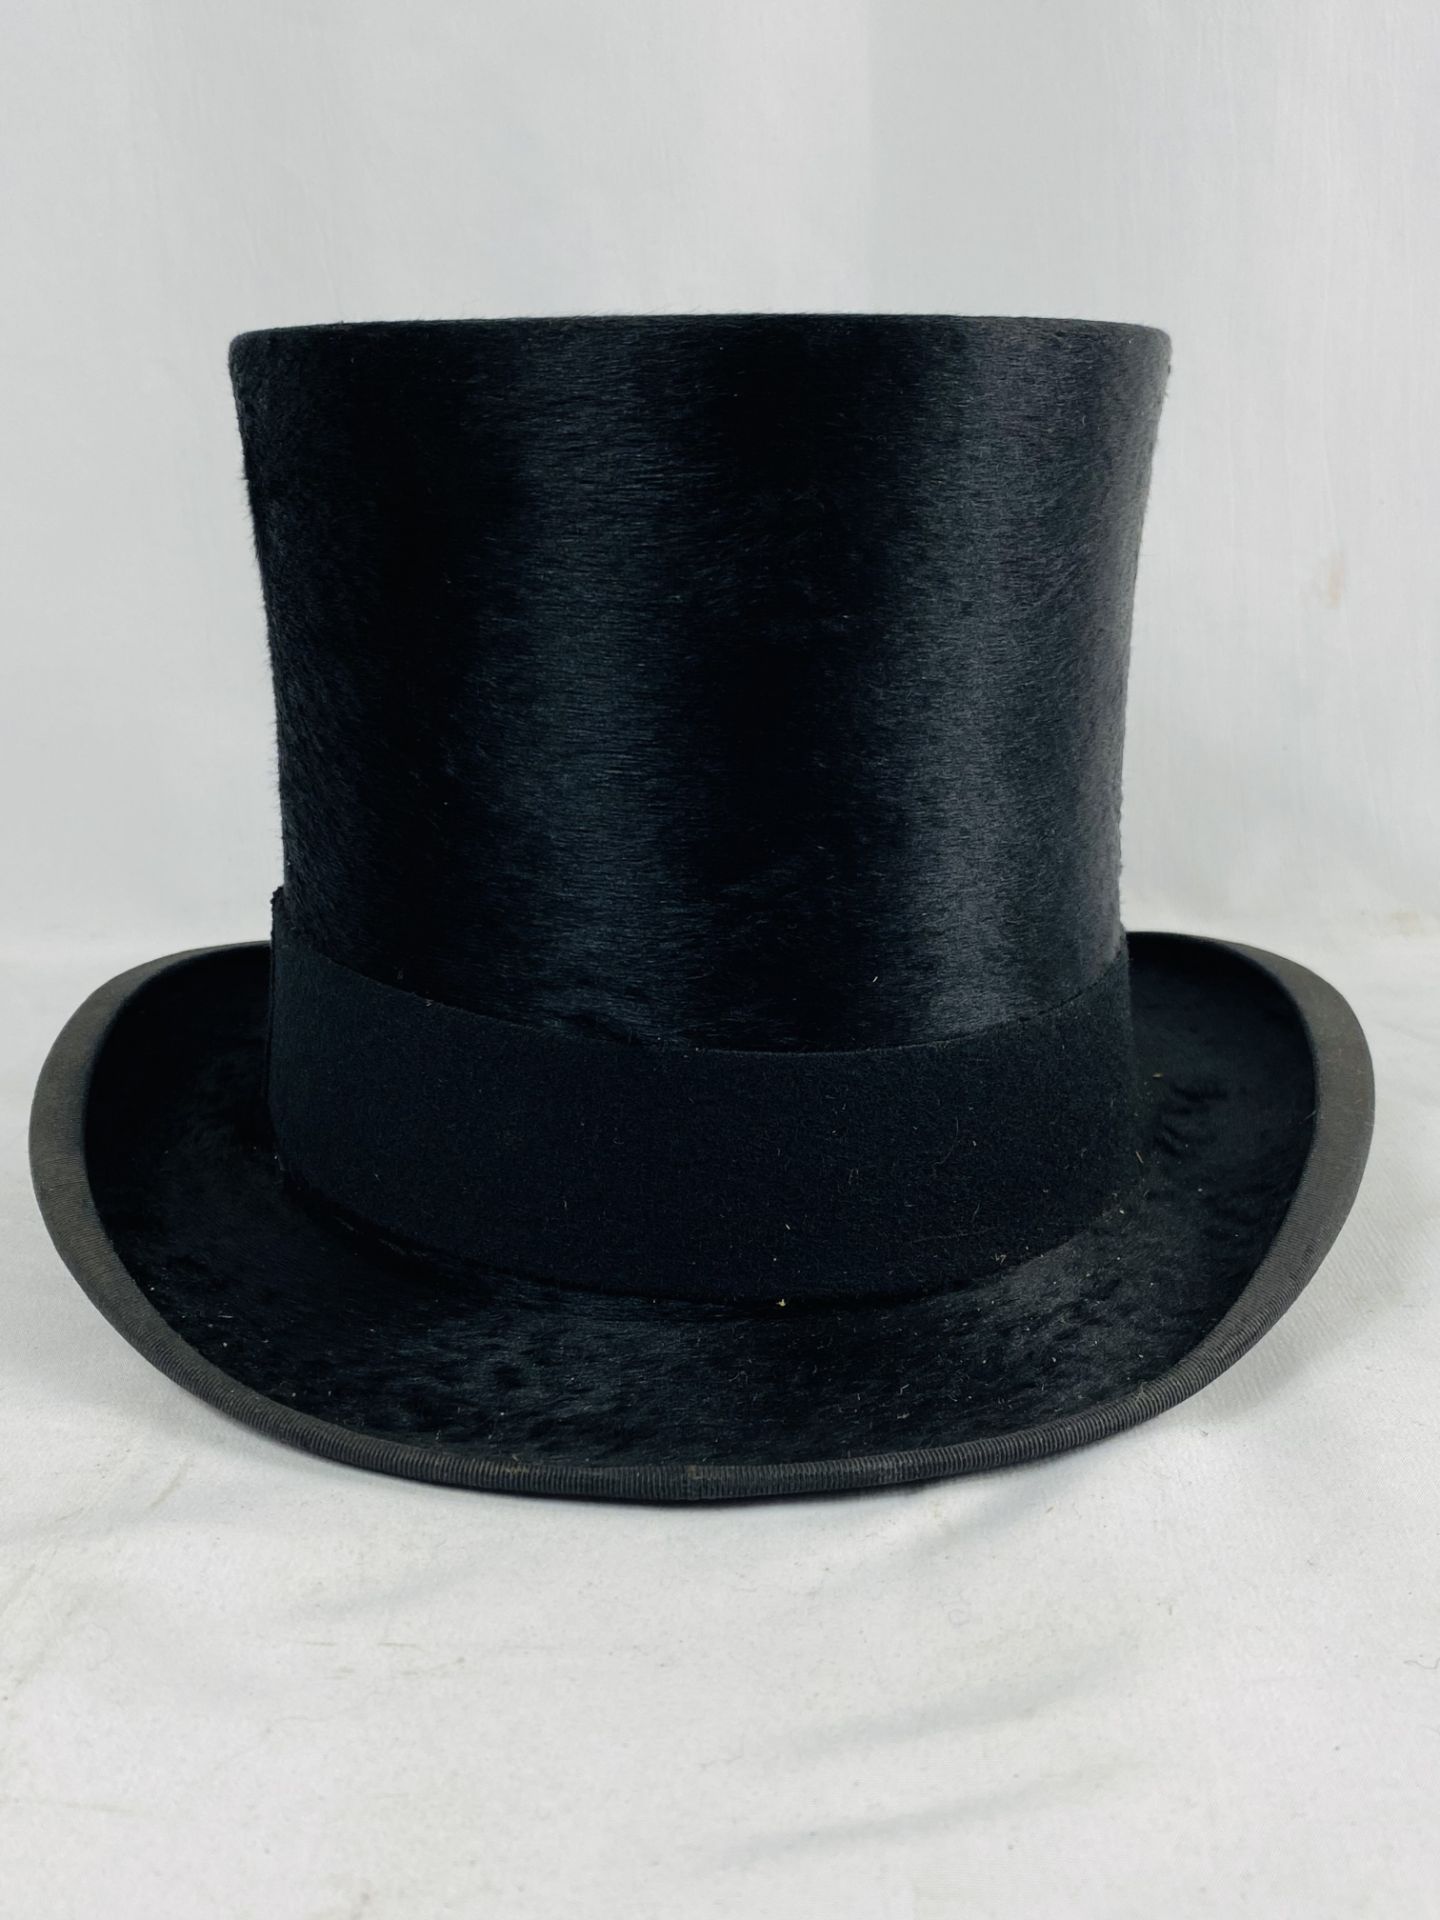 Dunn & Co childs silk top hat - Image 7 of 7